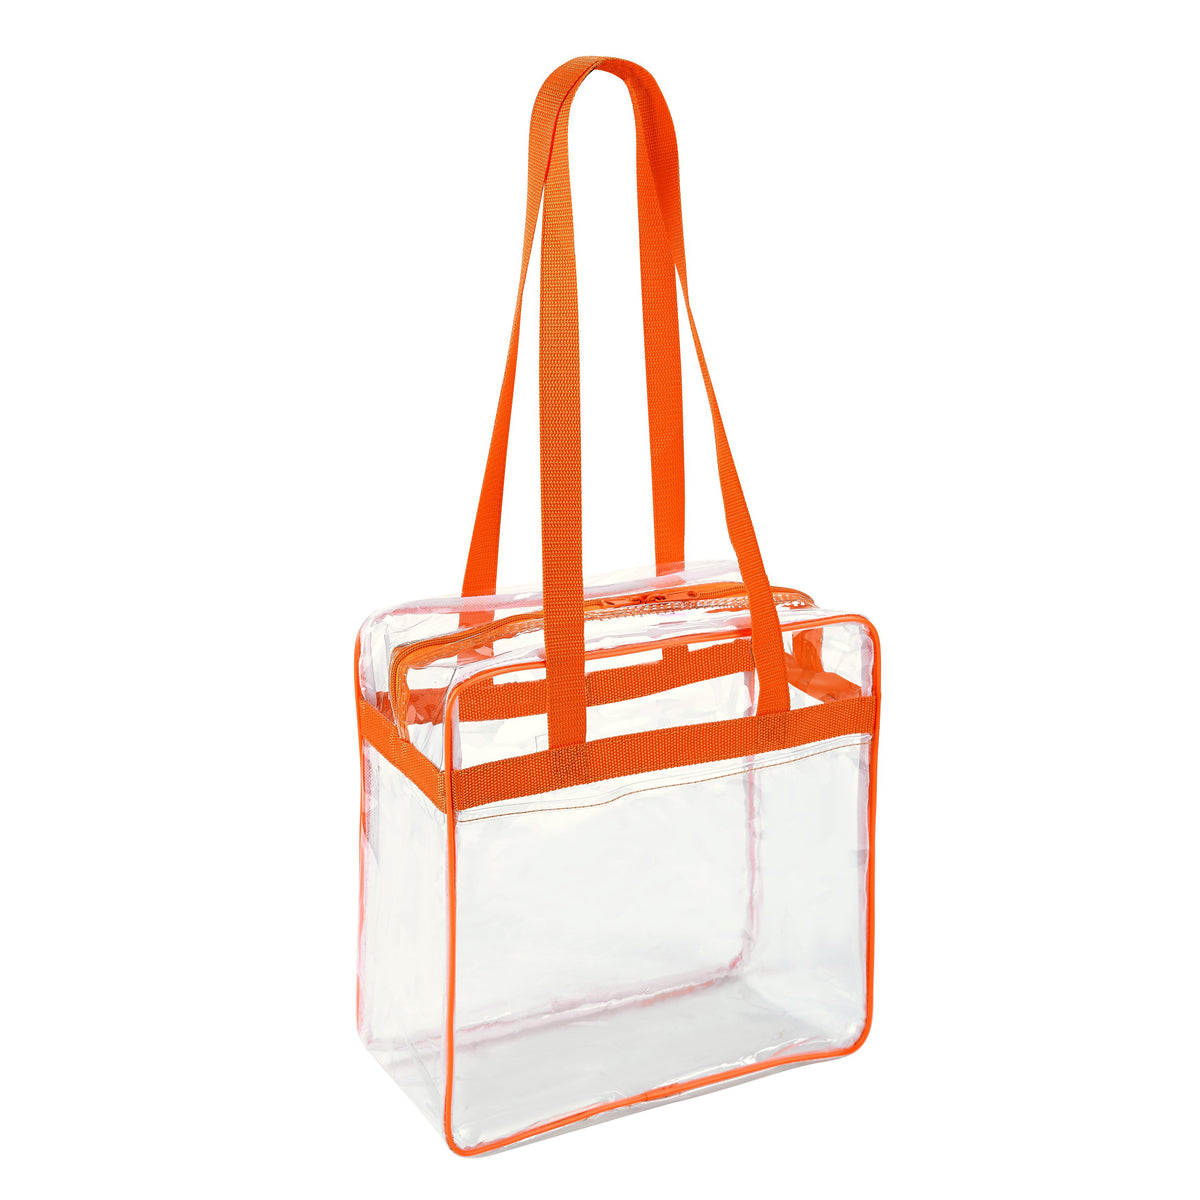 2 Pack Stadium Approved Clear Tote Bags with Handles for Beach Concert,  12x6x12